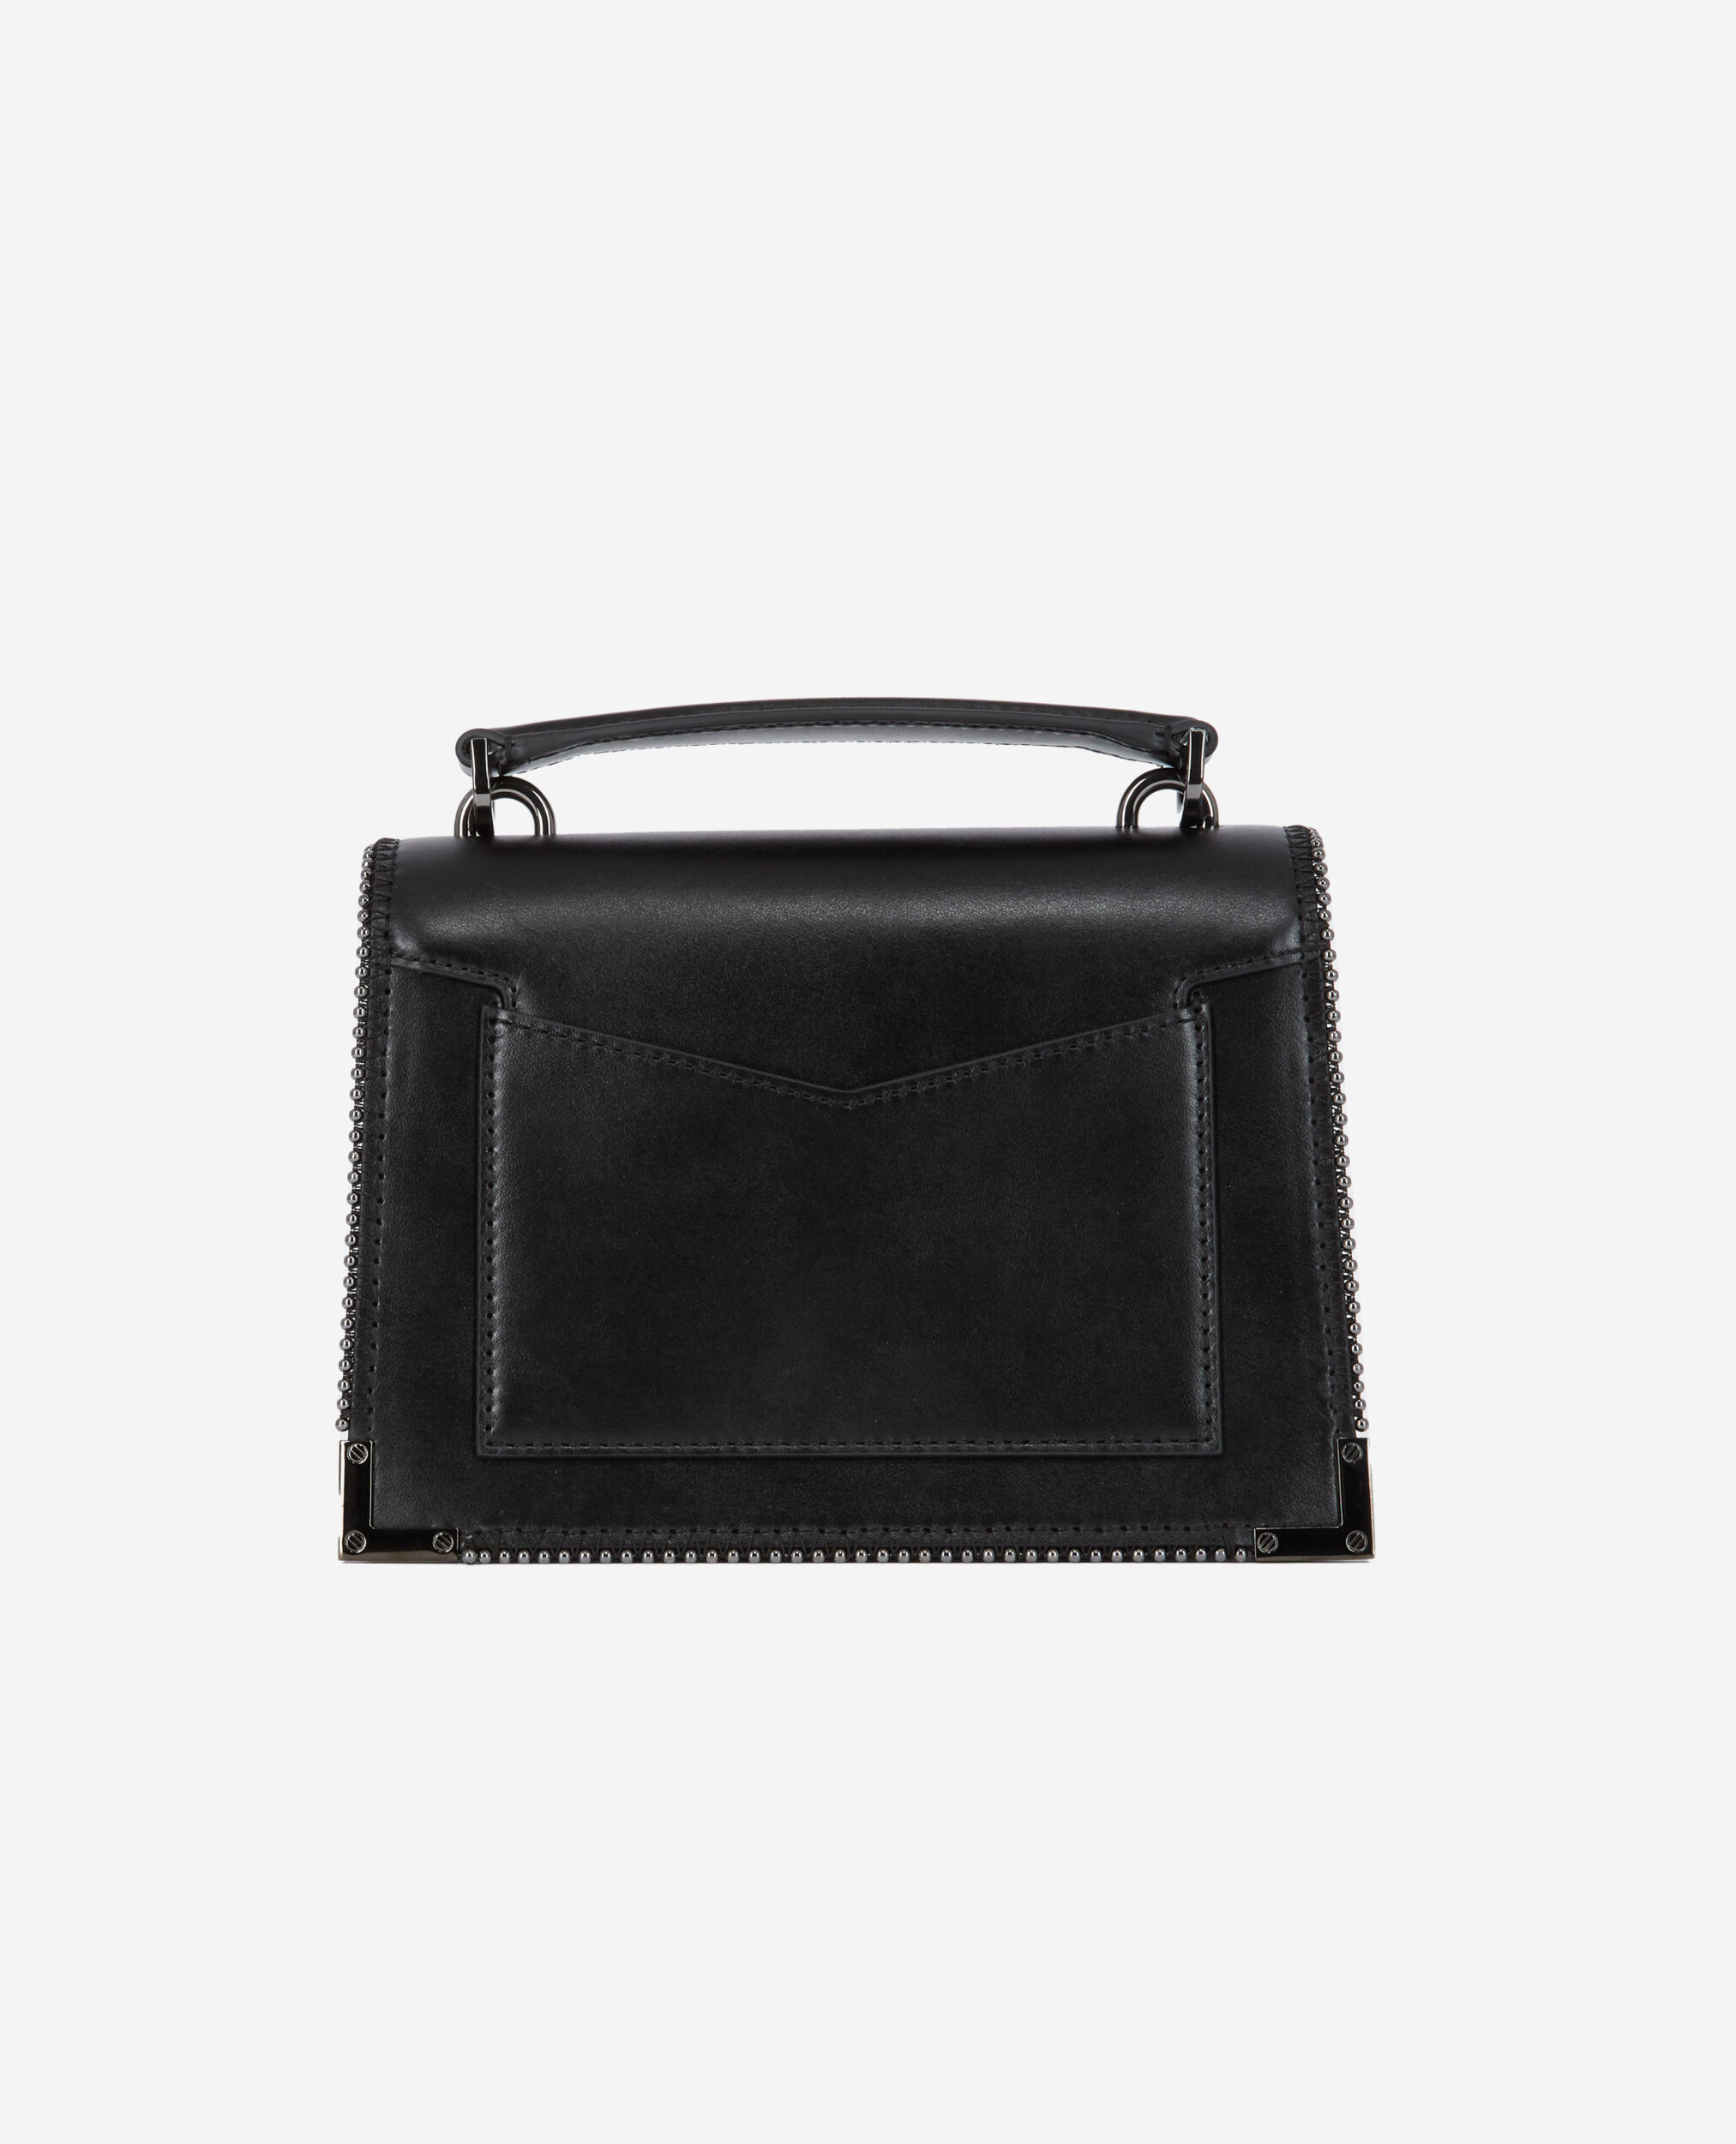 Small Emily bag in black leather, BLACK, hi-res image number null